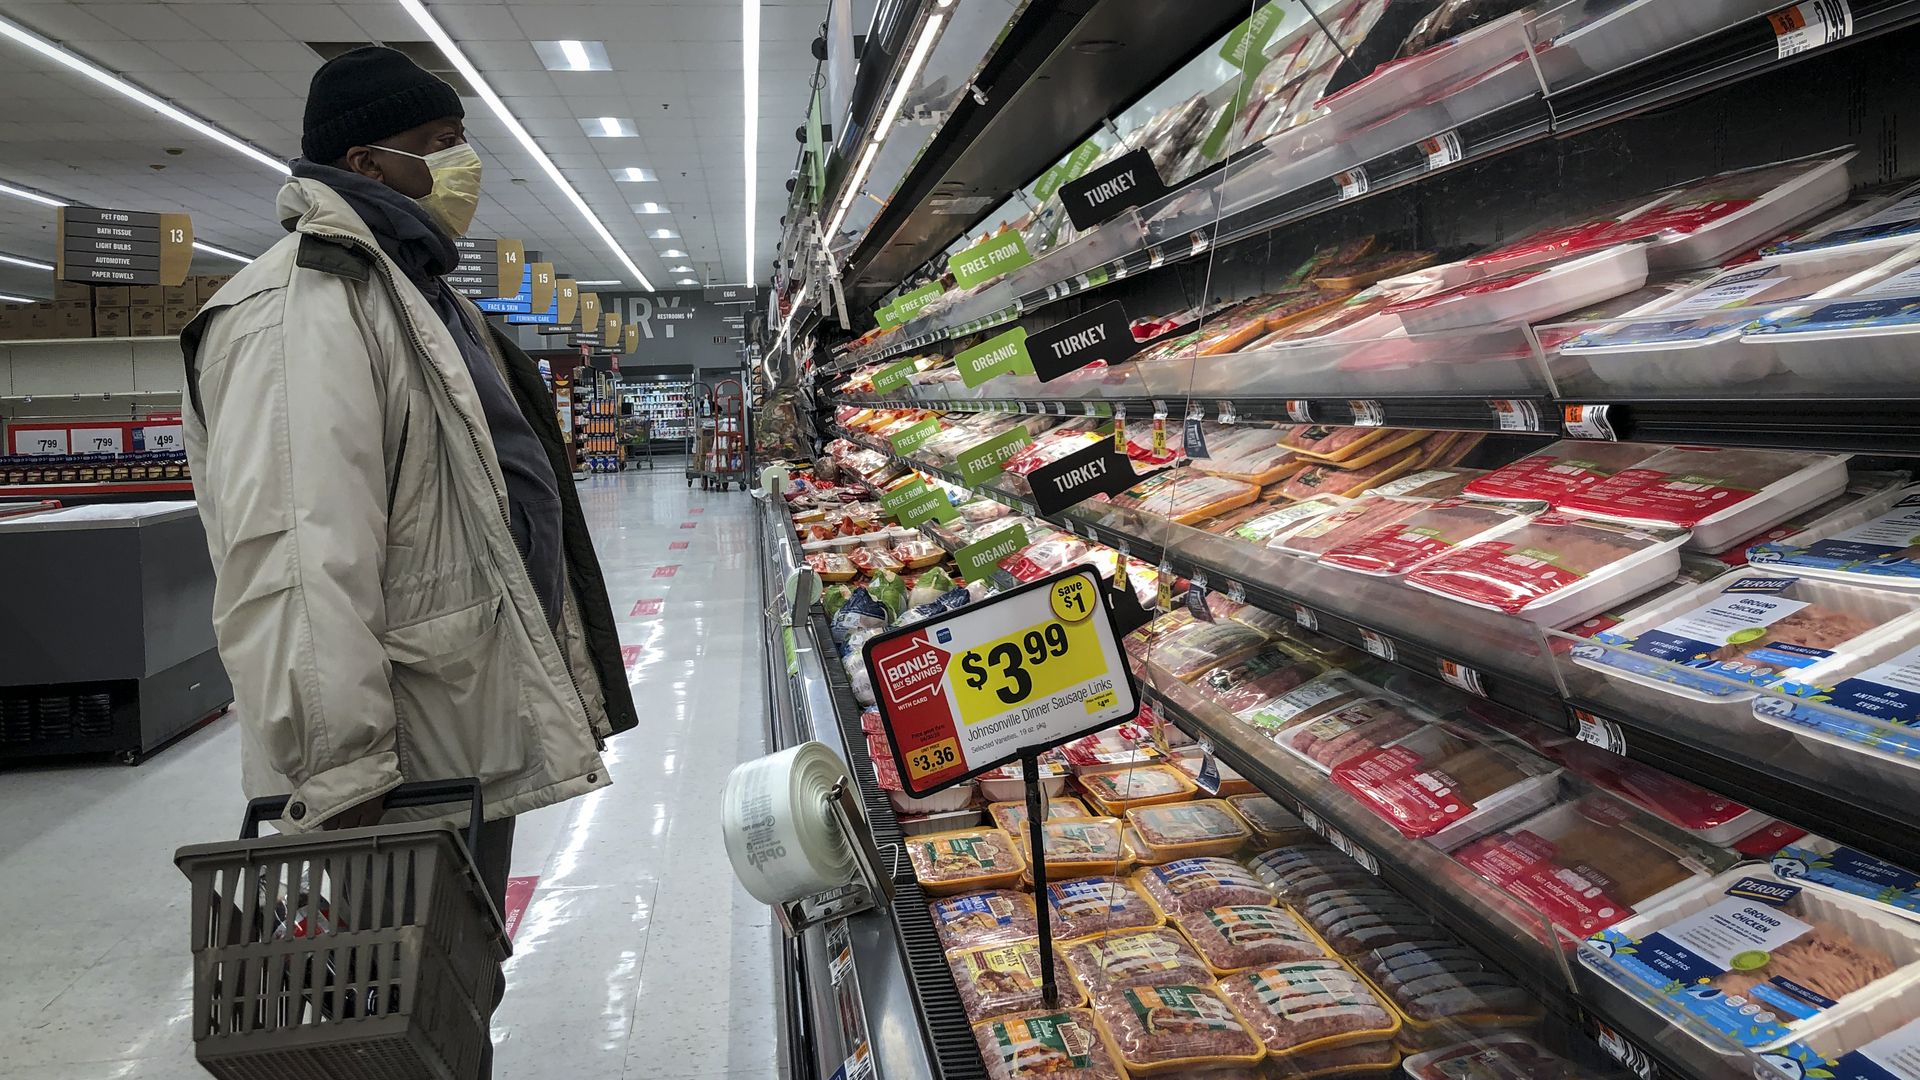 In this image, a man stands with a shopping basket in front of a meat produce aisle 